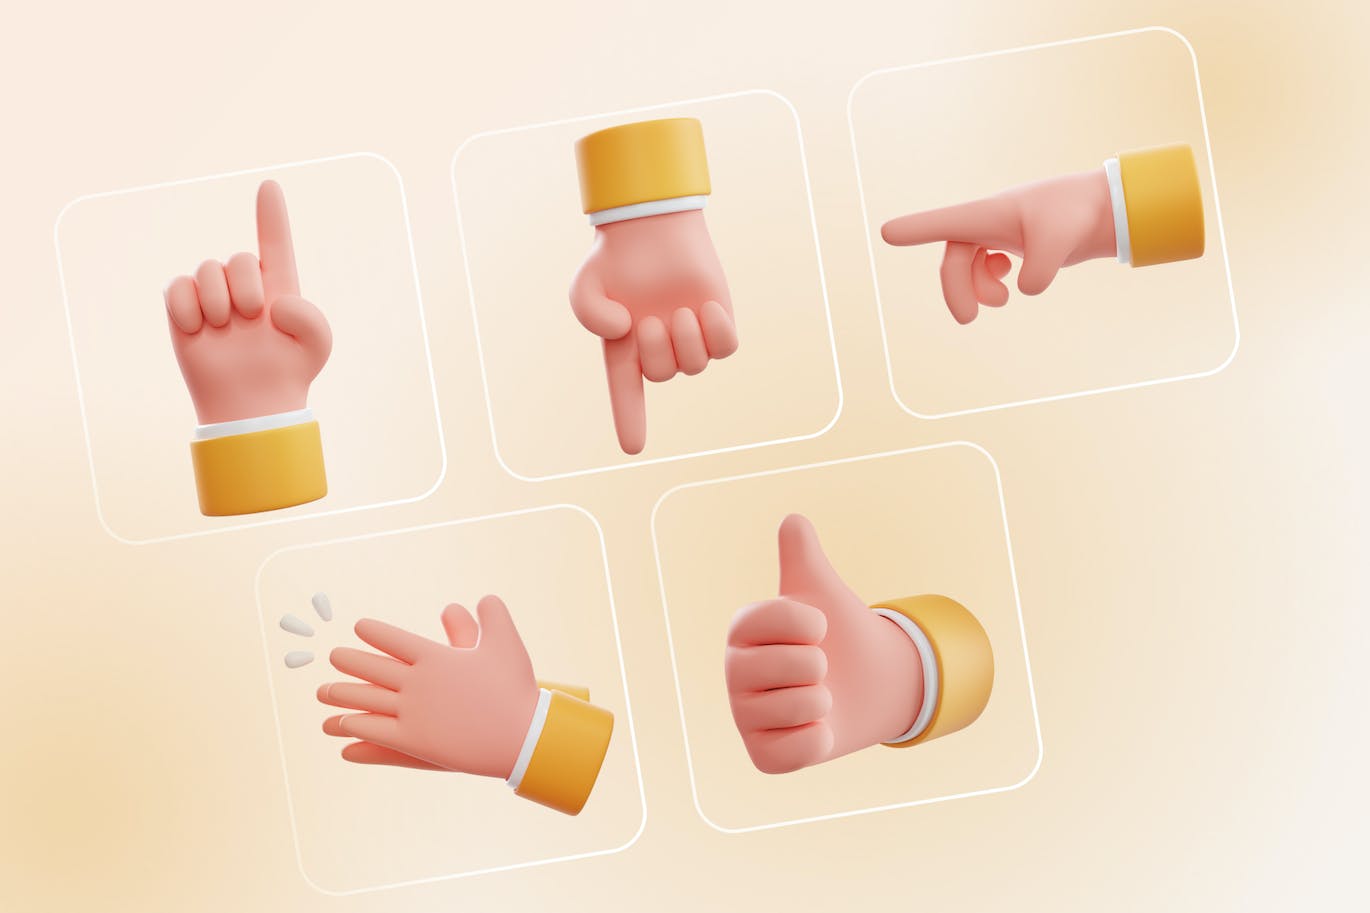 3D小胖手主题卡通手势合集3d-thumbs-up-clapping-pointing-hand-gestures-酷社 (KUSHEW)